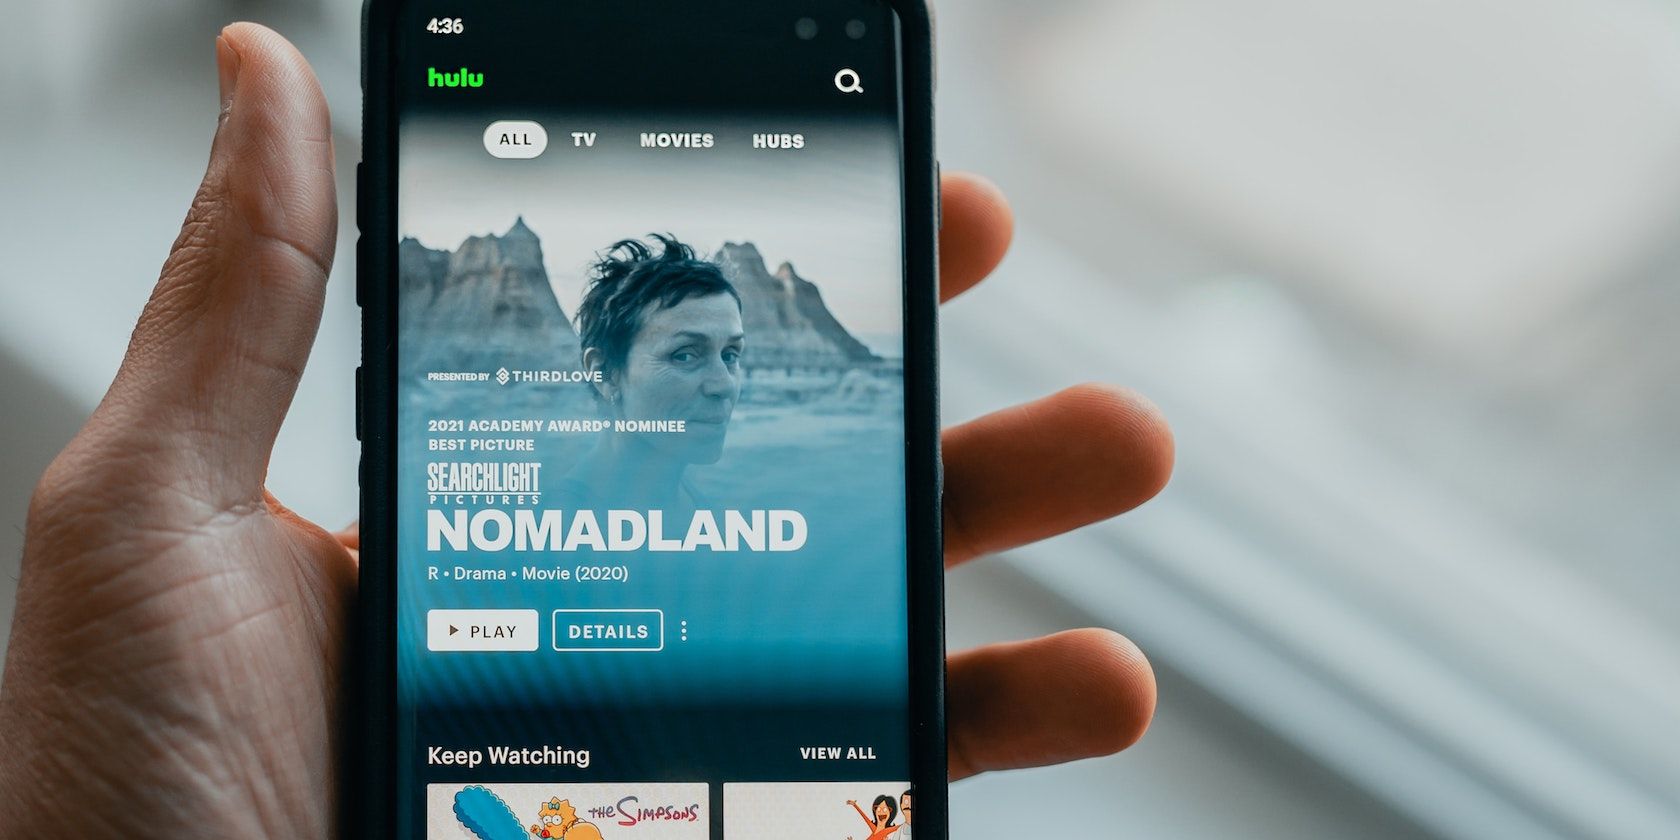 Person holding a phone with Hulu featured